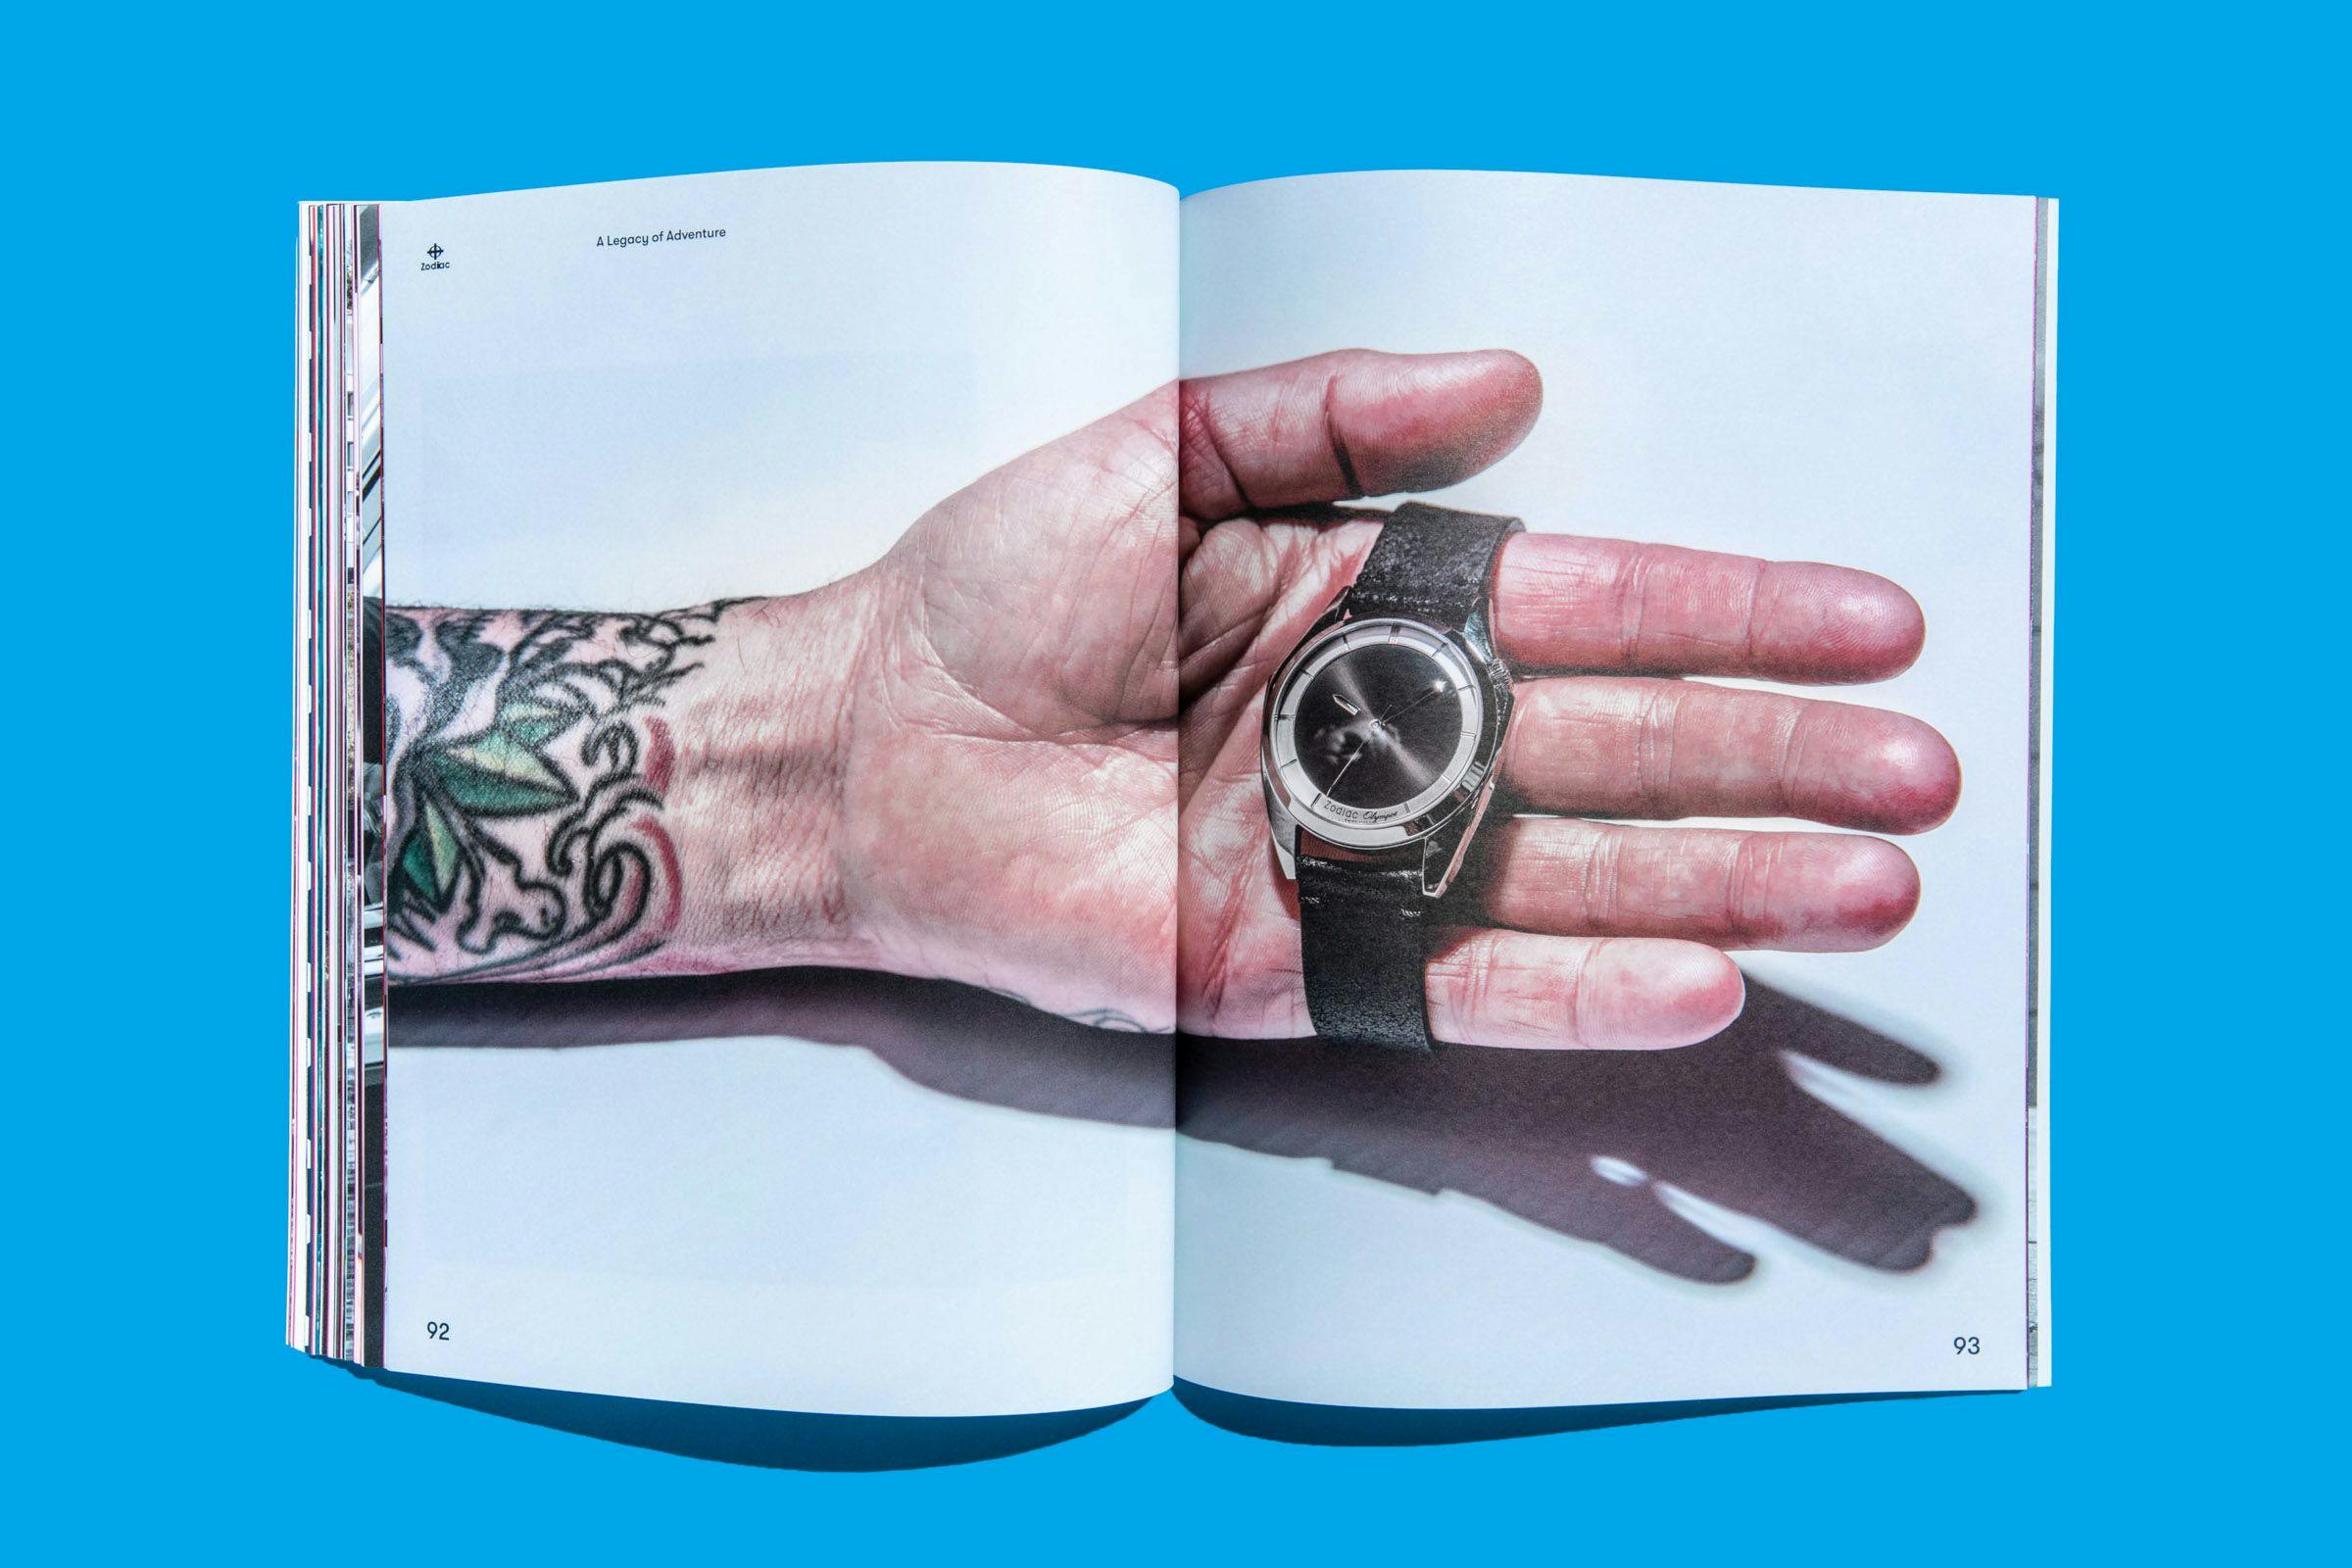 A two-page spread showcasing someone holding a luxury Zodiac watch